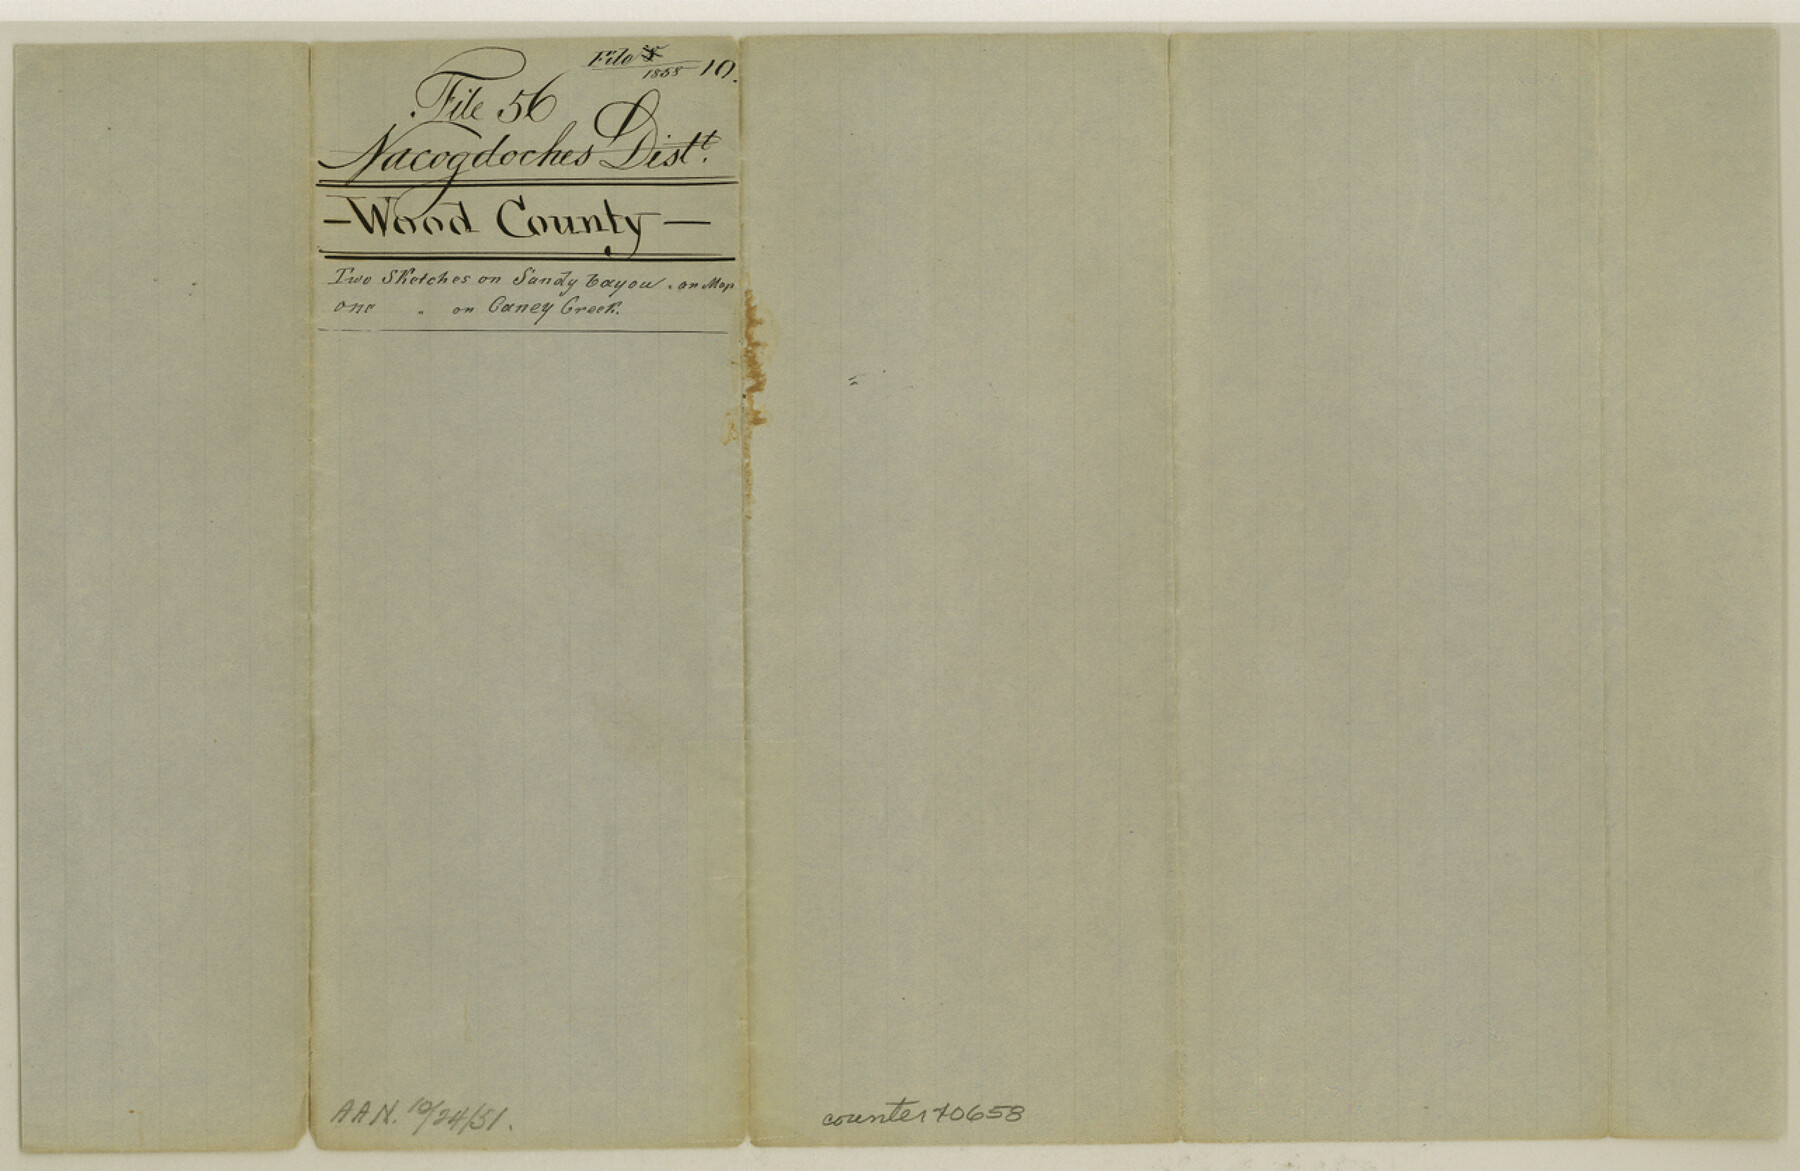 40658, Wood County Sketch File 10, General Map Collection